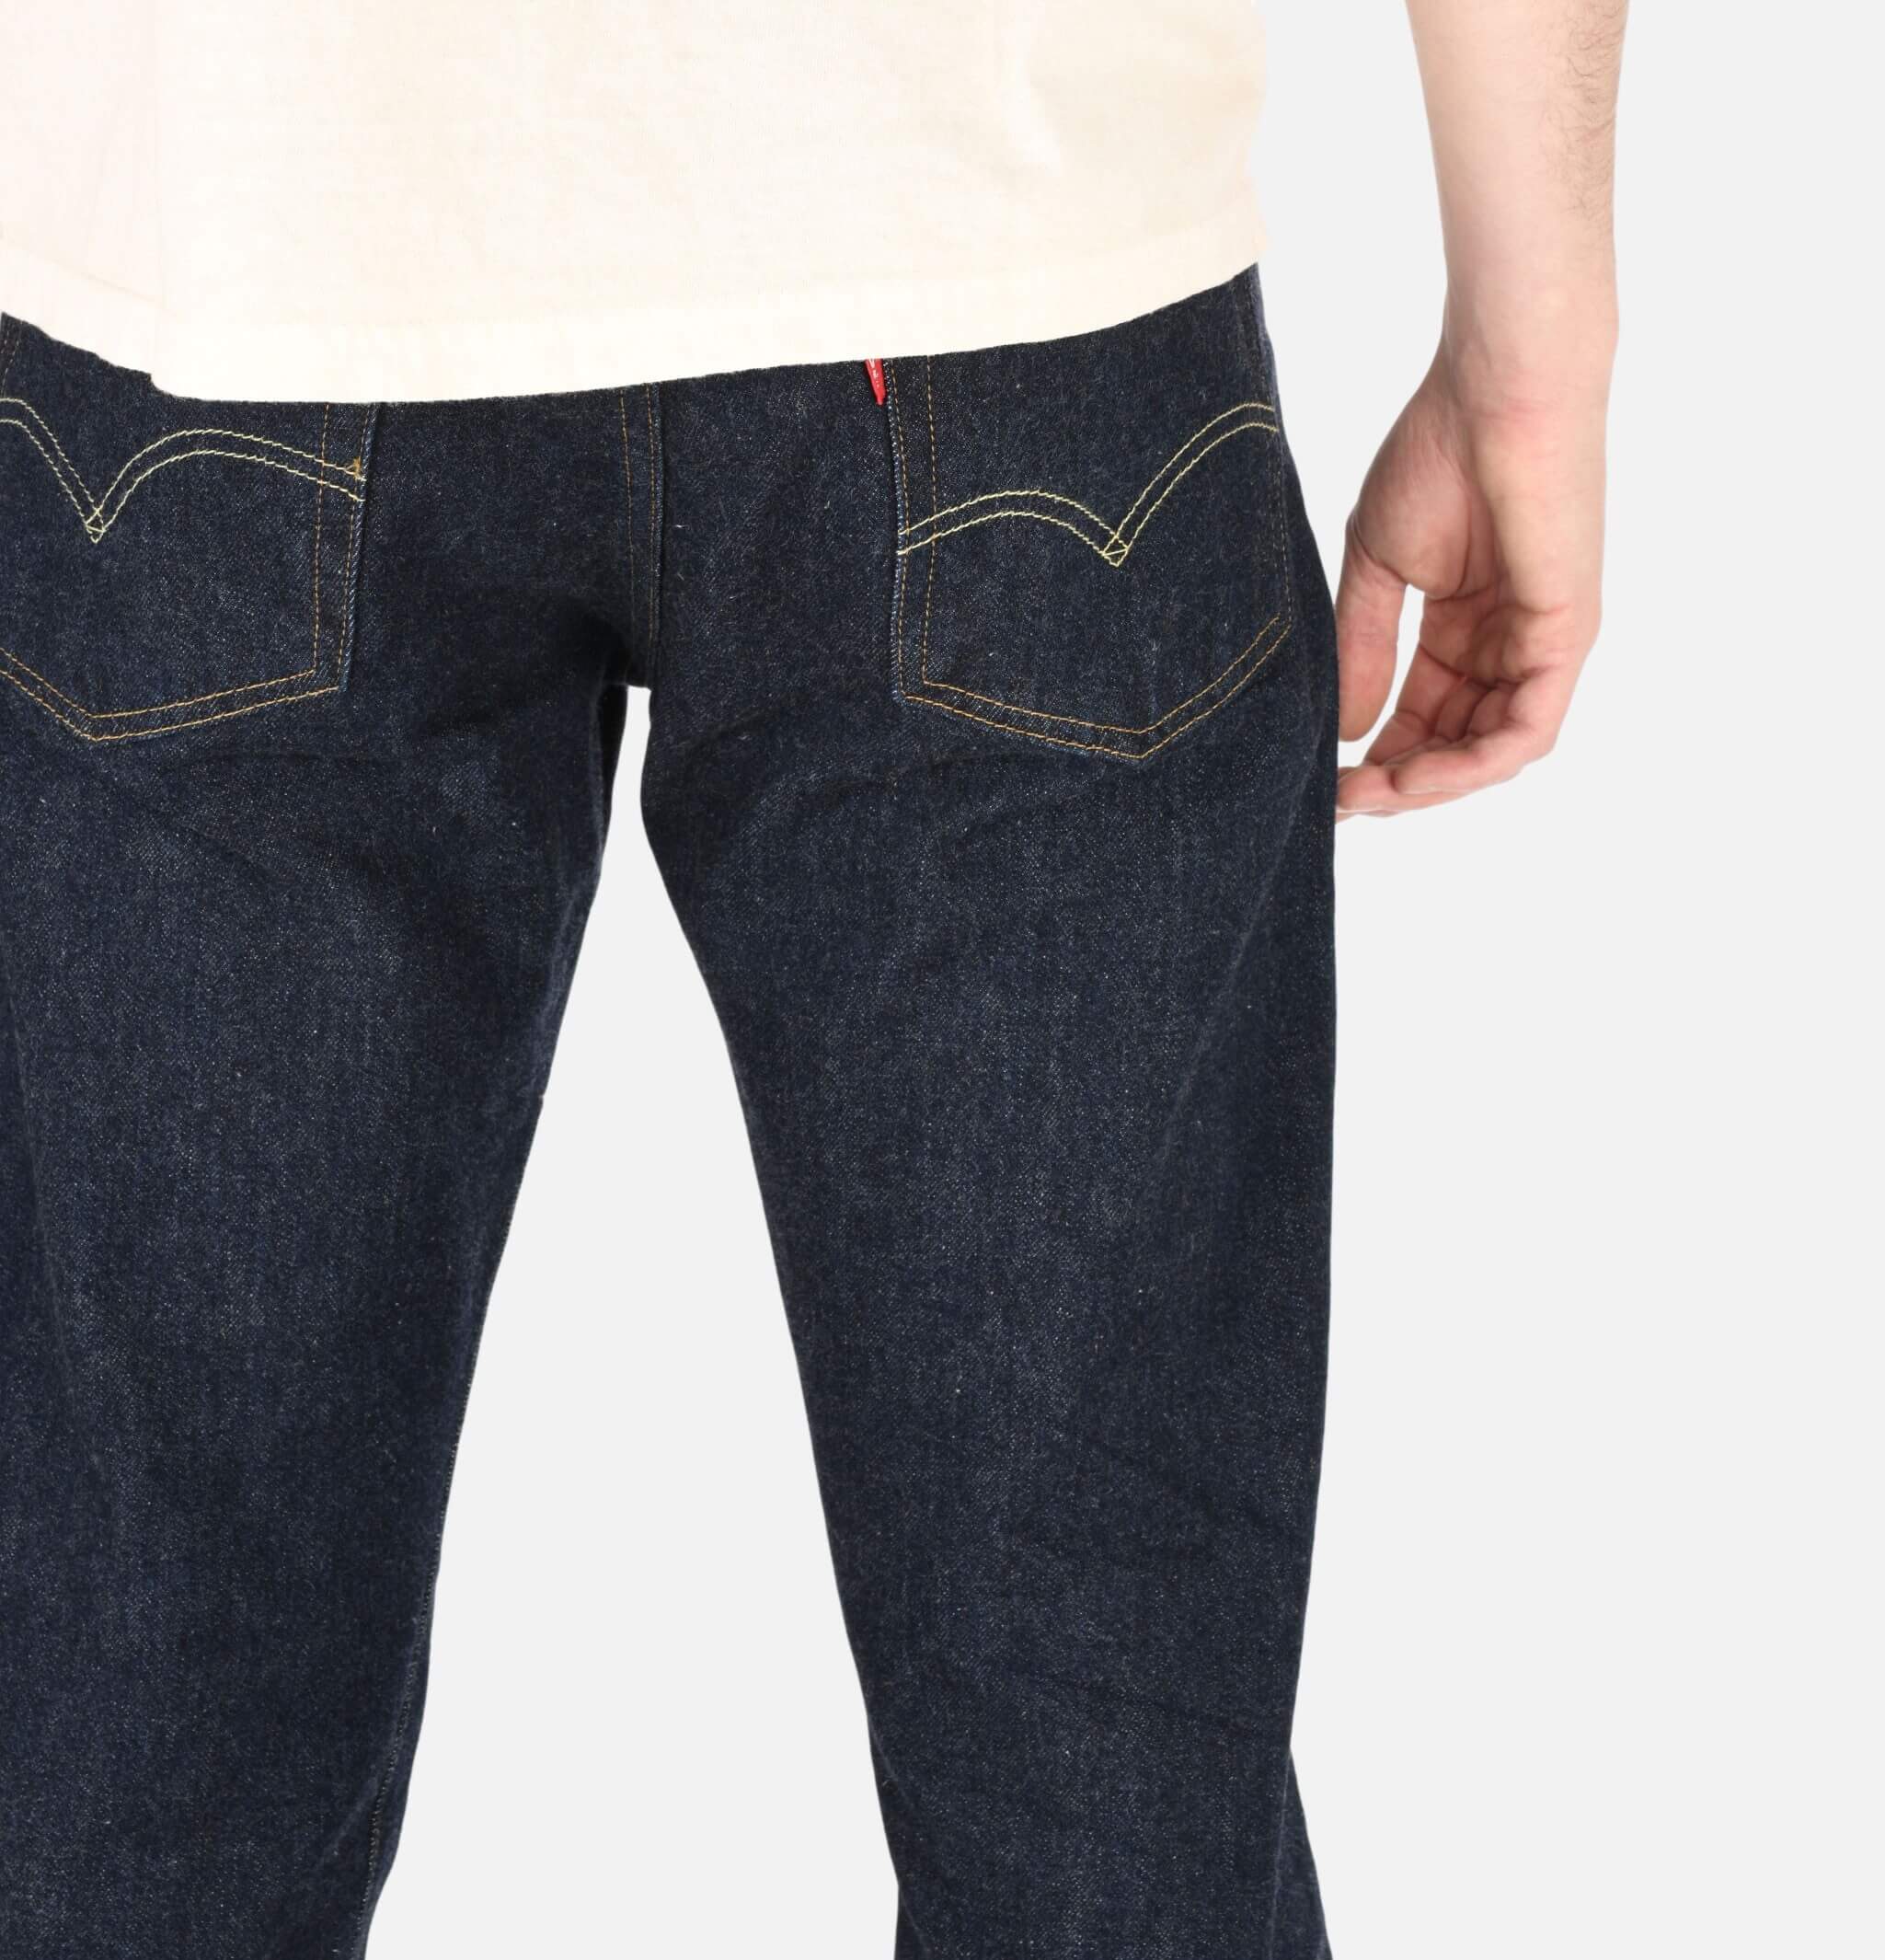 Levis Vintage Clothing 1947 501 Jeans - Rigid on Garmentory  Levis vintage  clothing, Vintage clothing men, Mens outfits